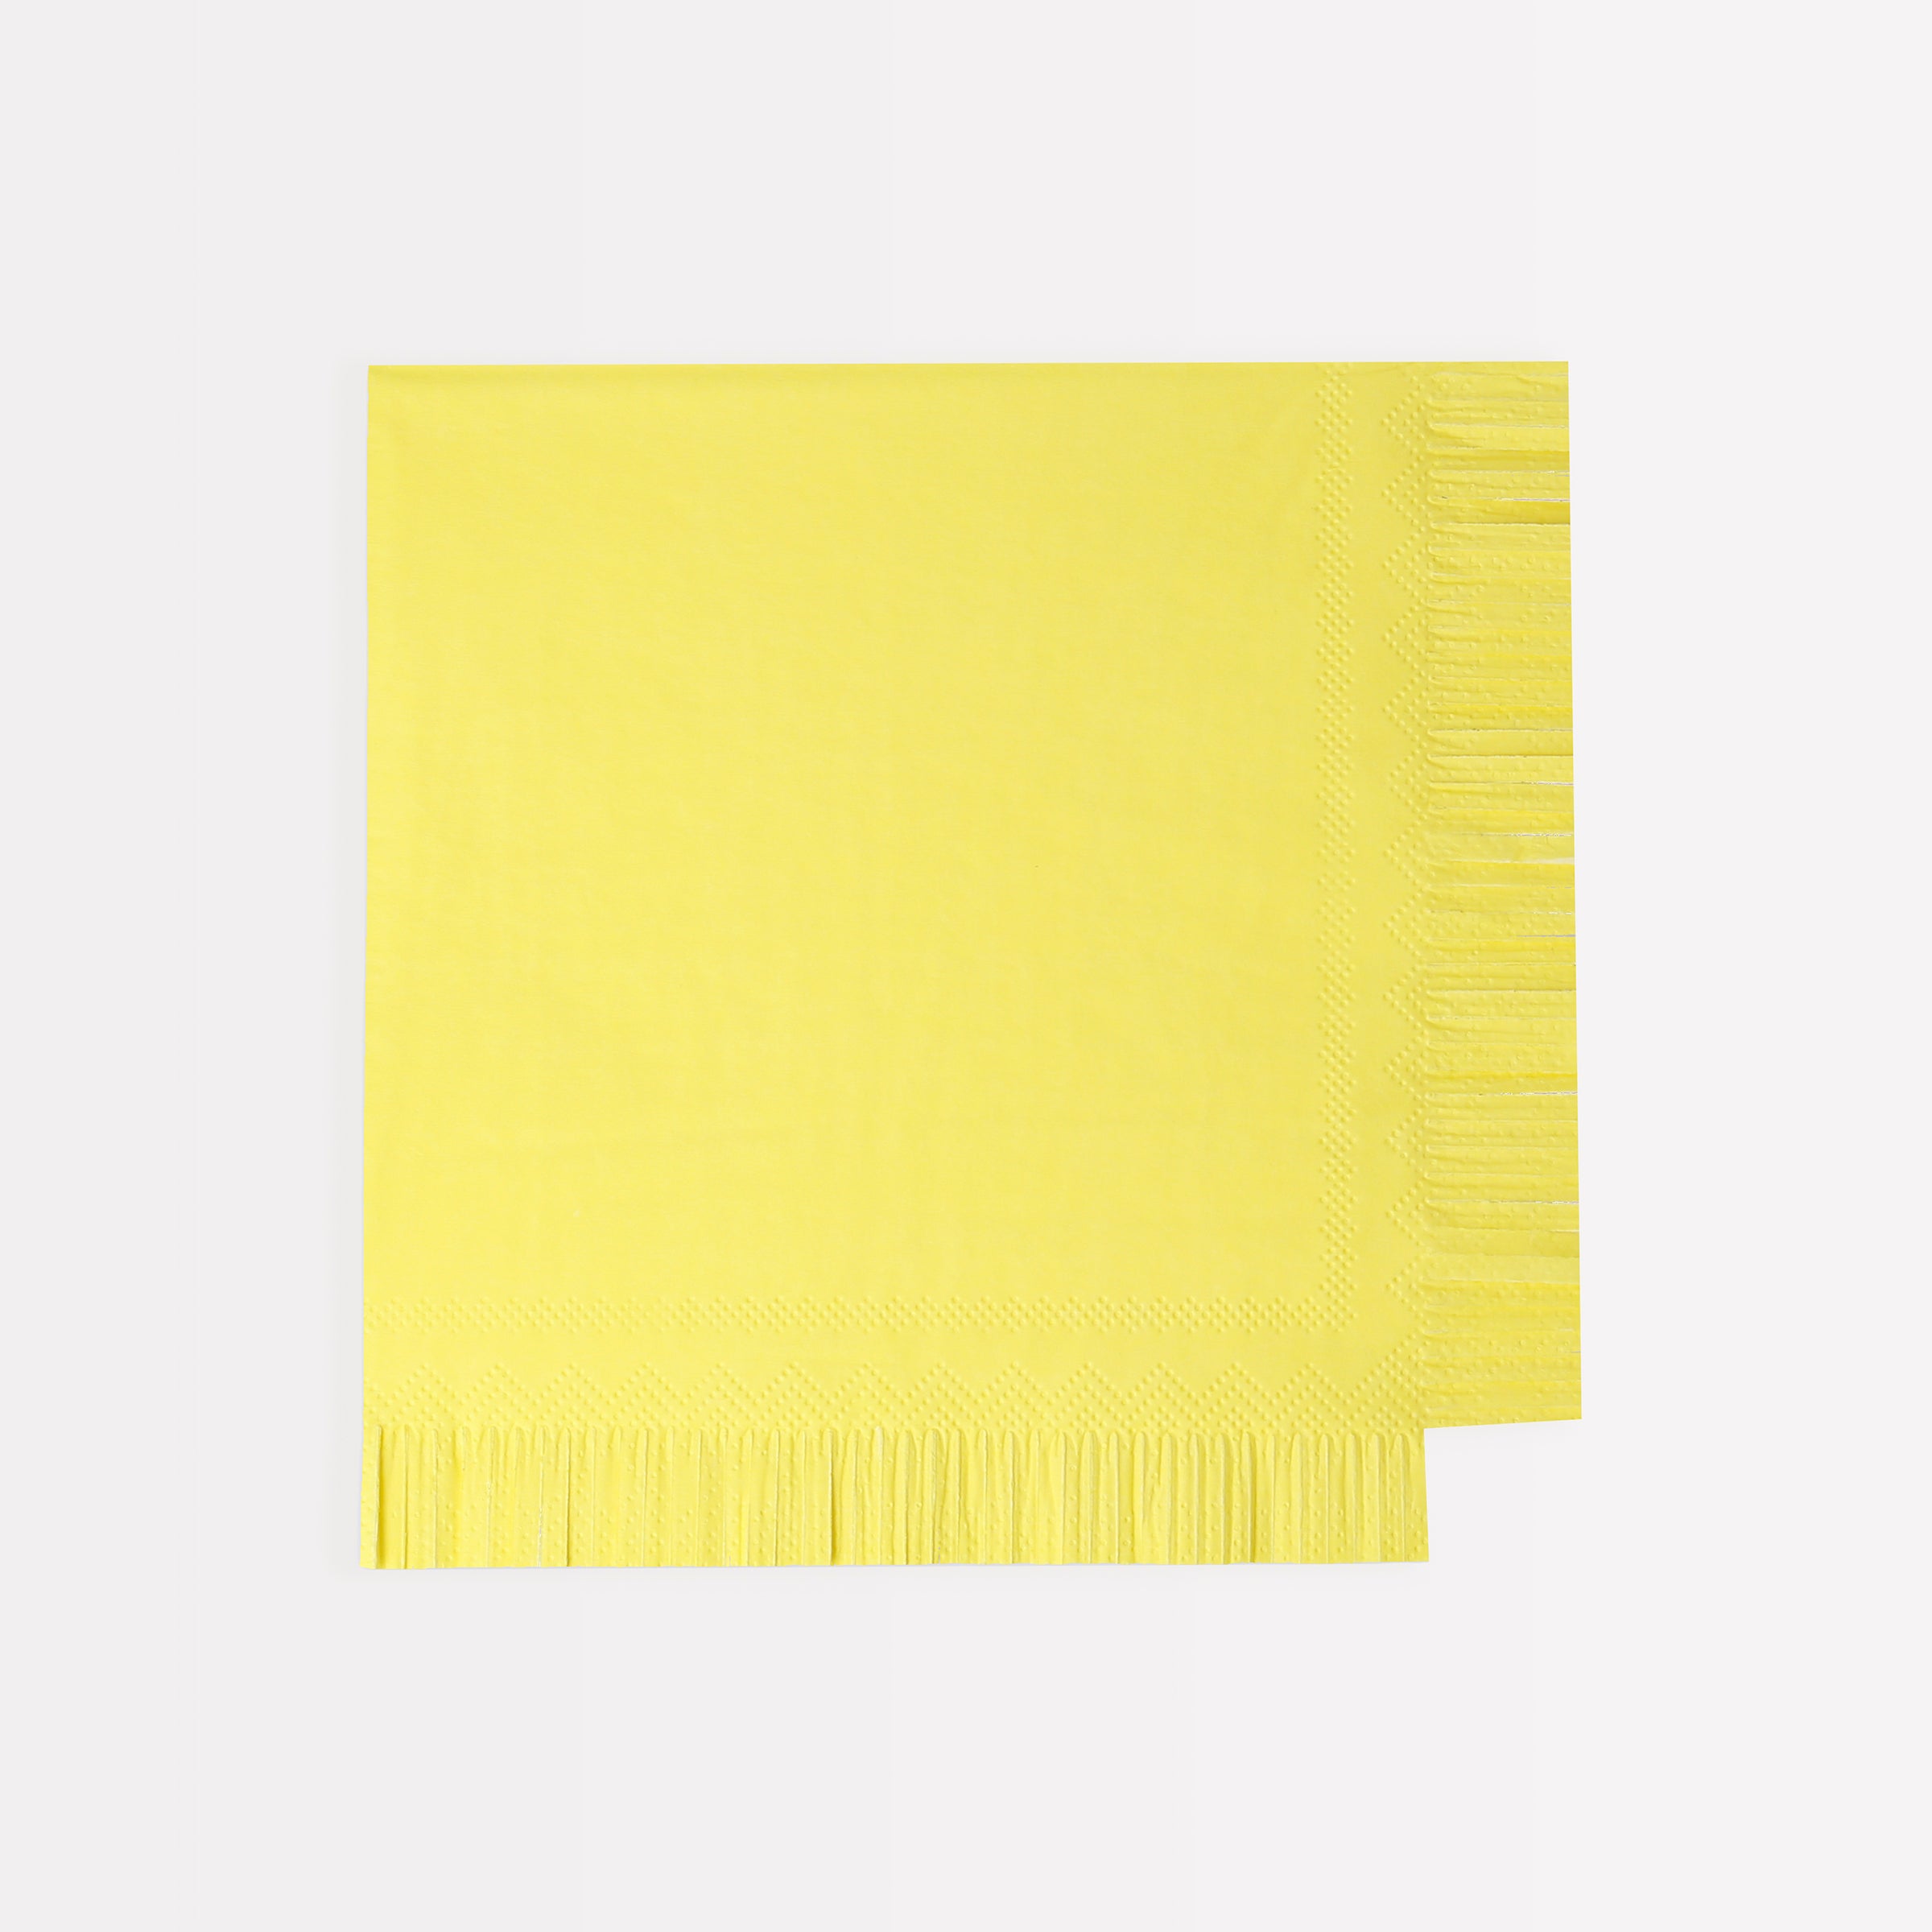 Our party napkins, in bright colors, add a decorative touch to your birthday party table.